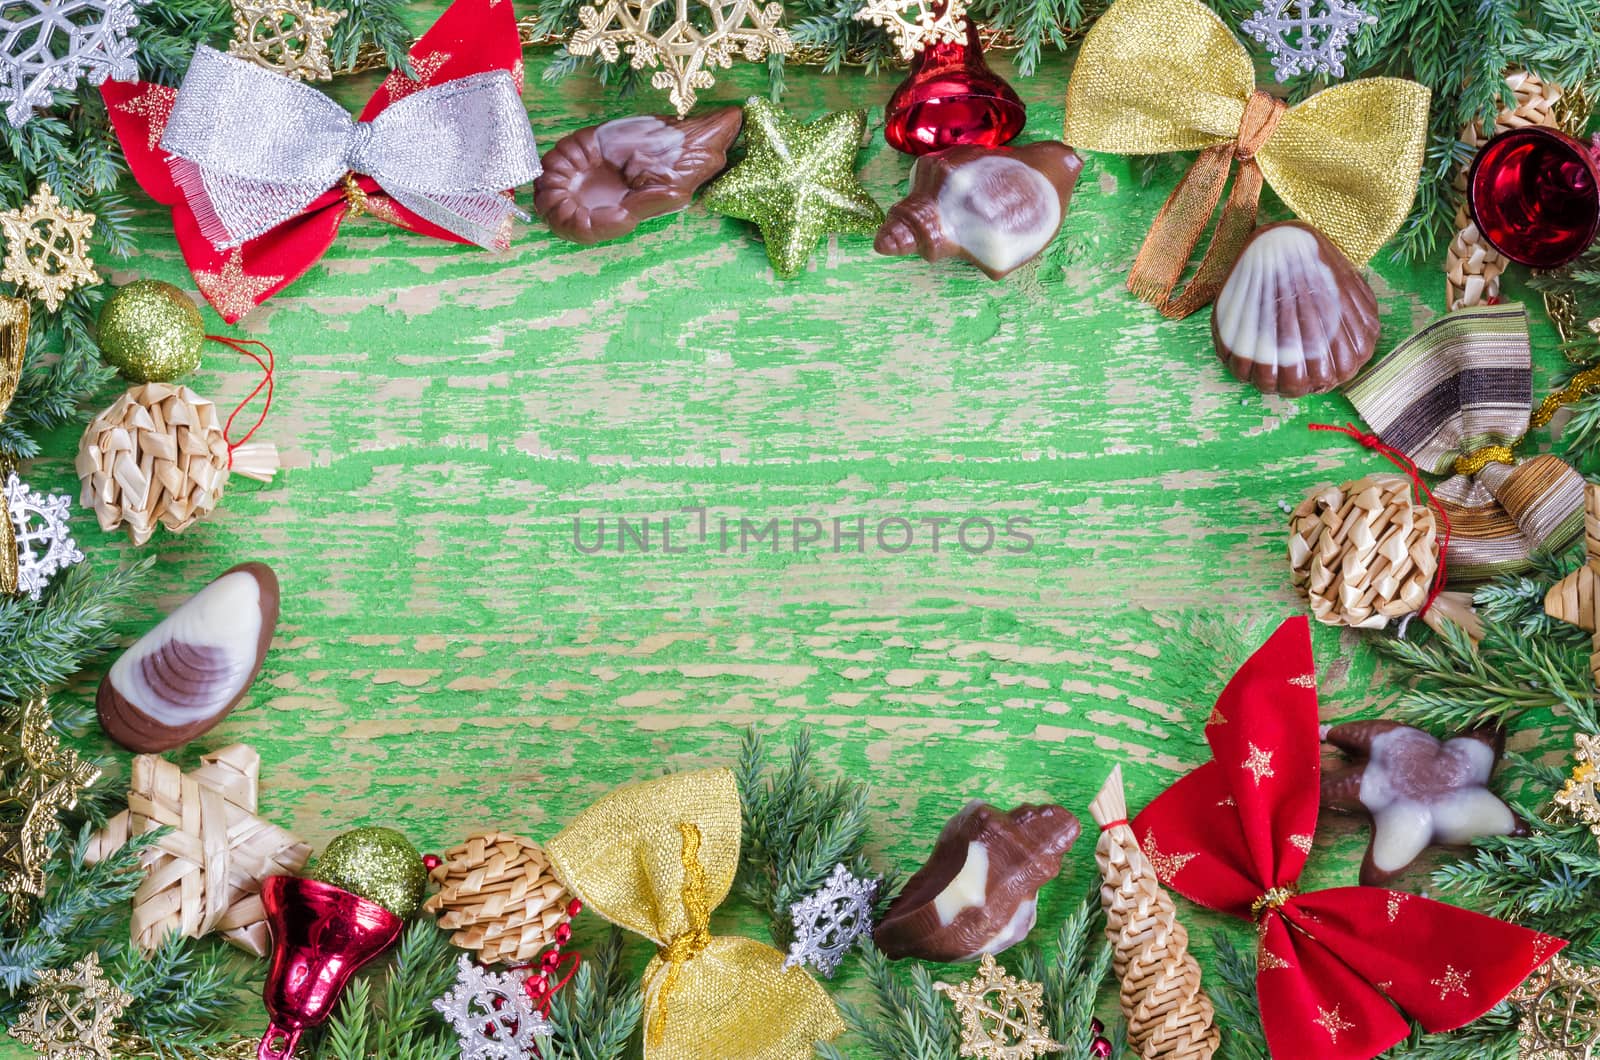 Vignette of Christmas ornaments,sprigs of juniper and chocolate. Old wooden background,painted green, lots of space for inscriptions.